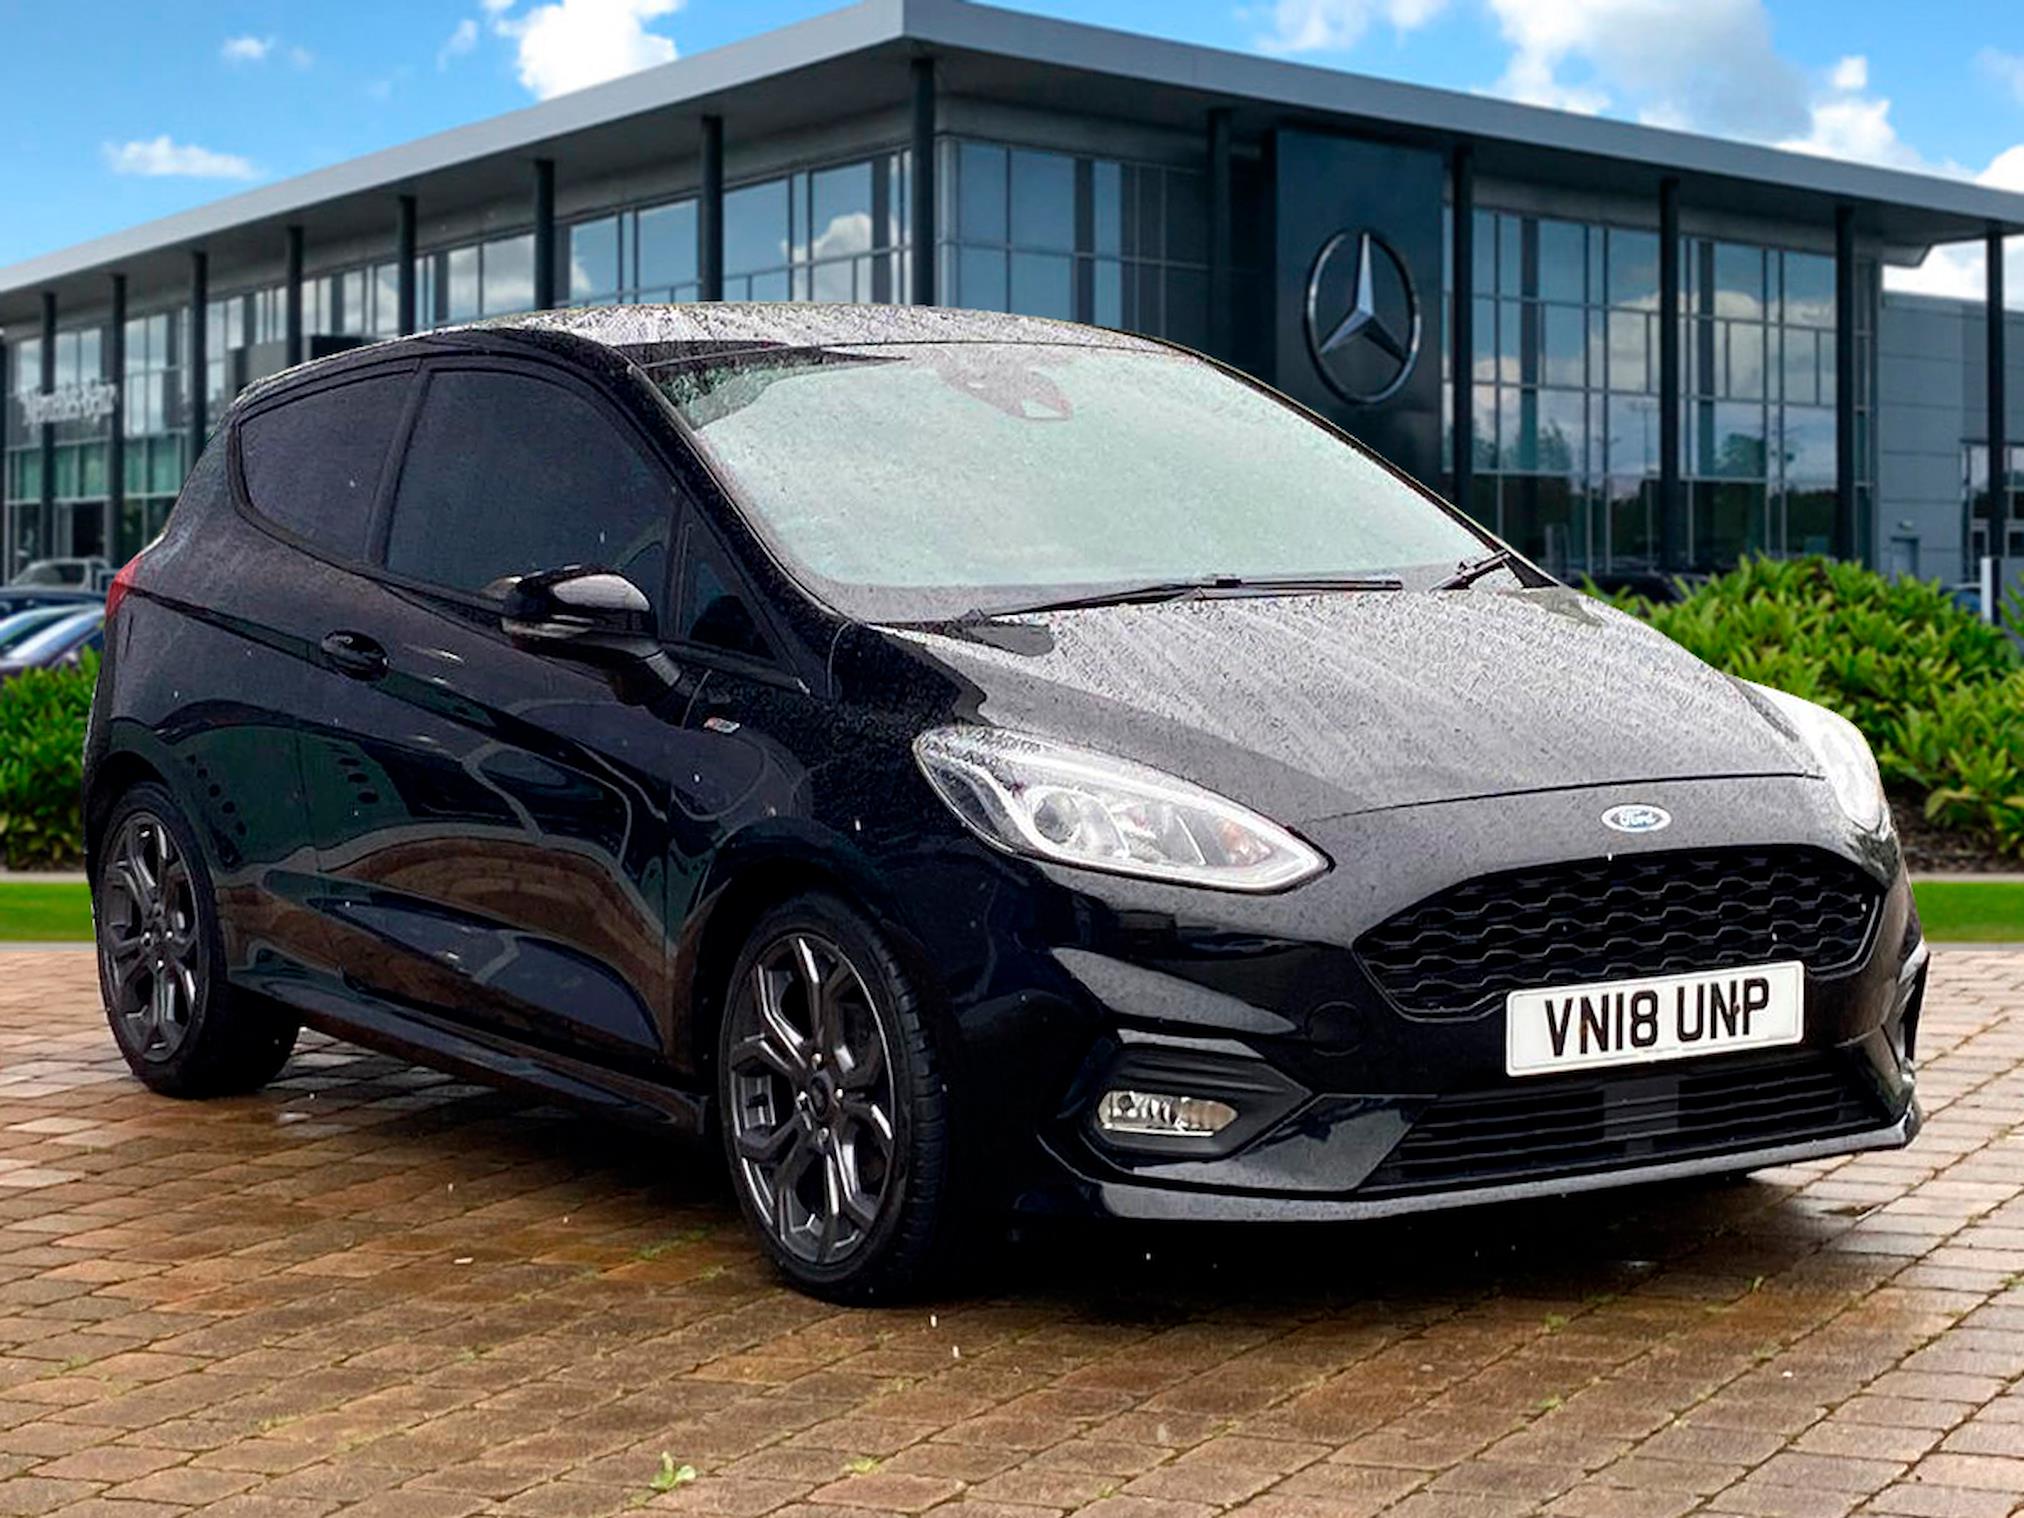 Used FORD FIESTA 1.0 Ecoboost St-Line 3Dr 2018